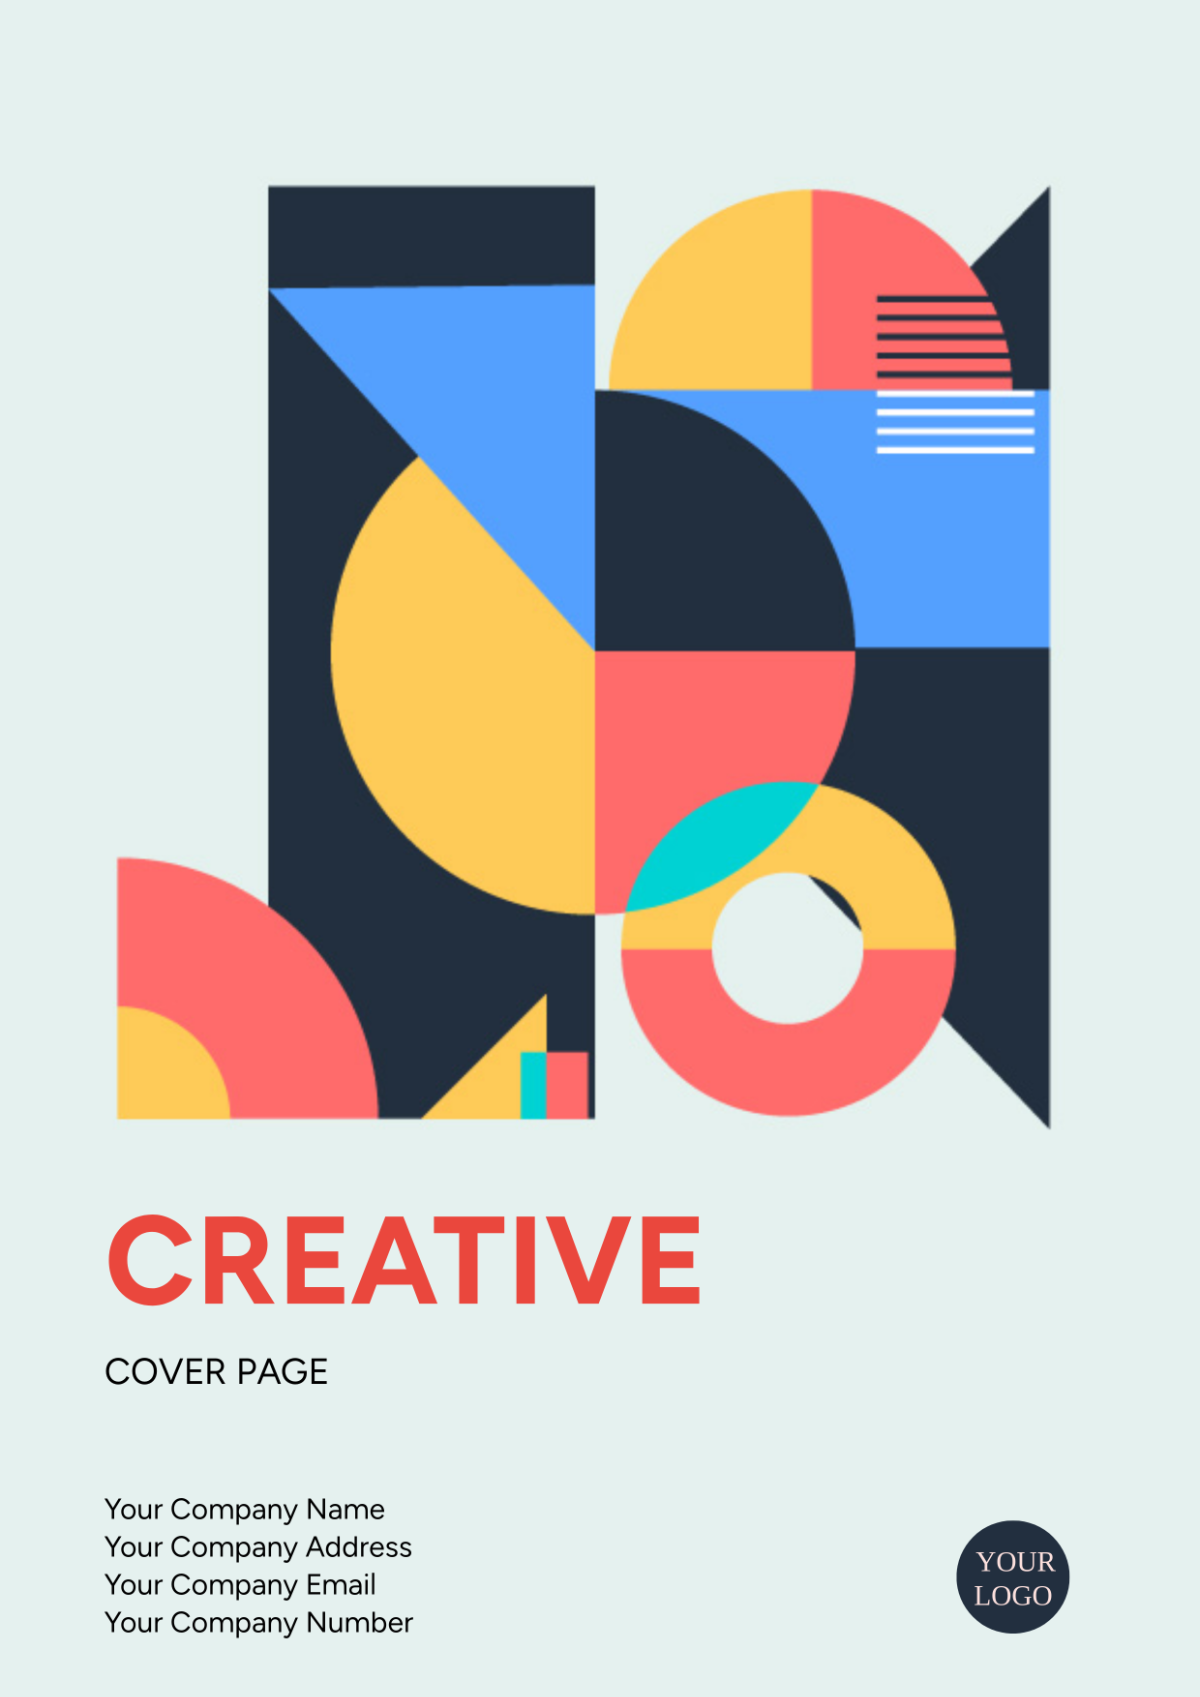 Creative Cover Page Image